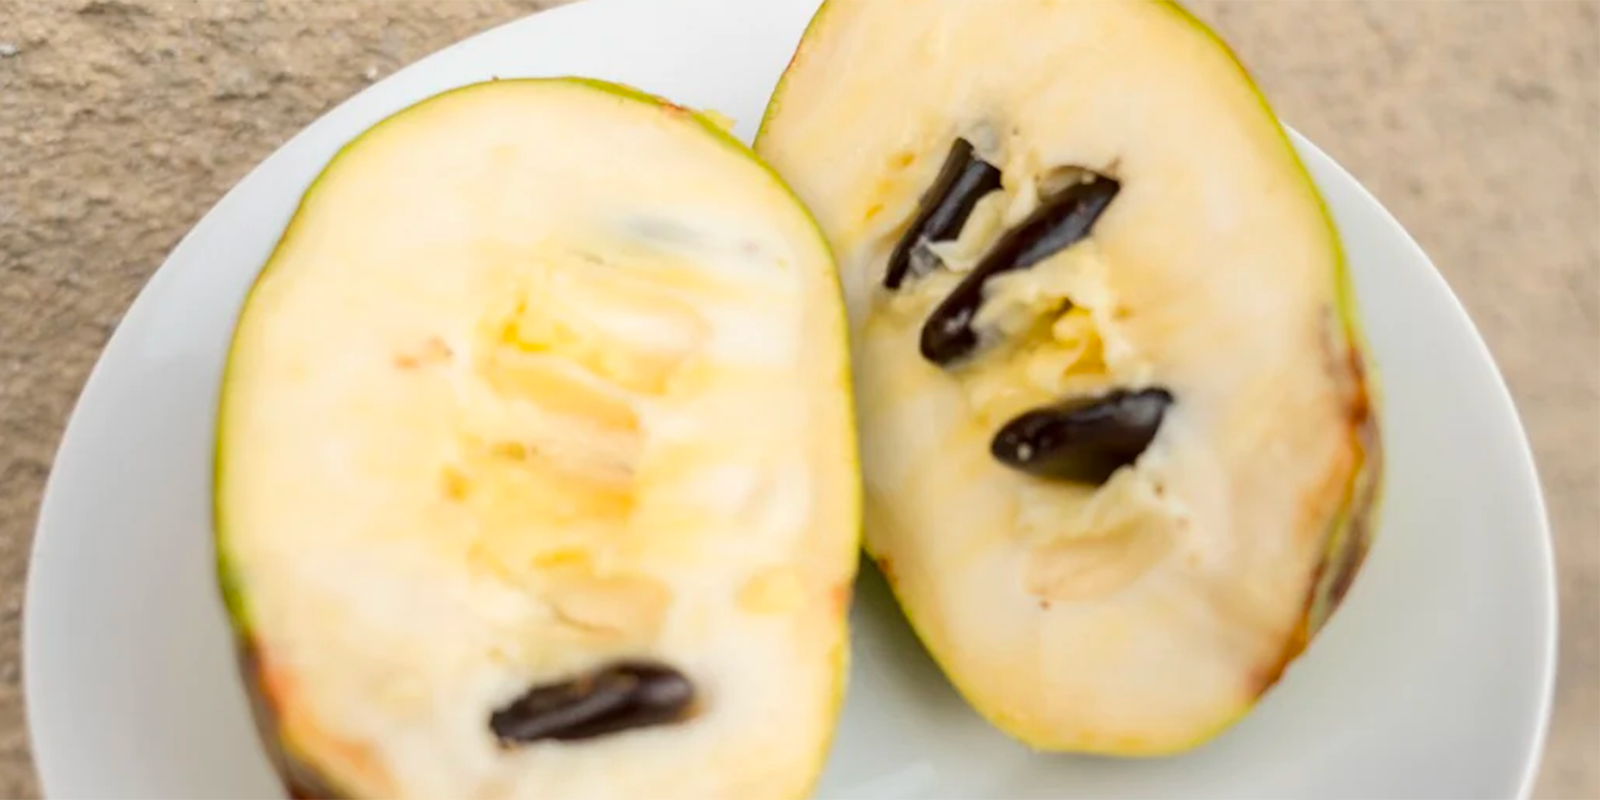 What does American Paw Paw taste like?